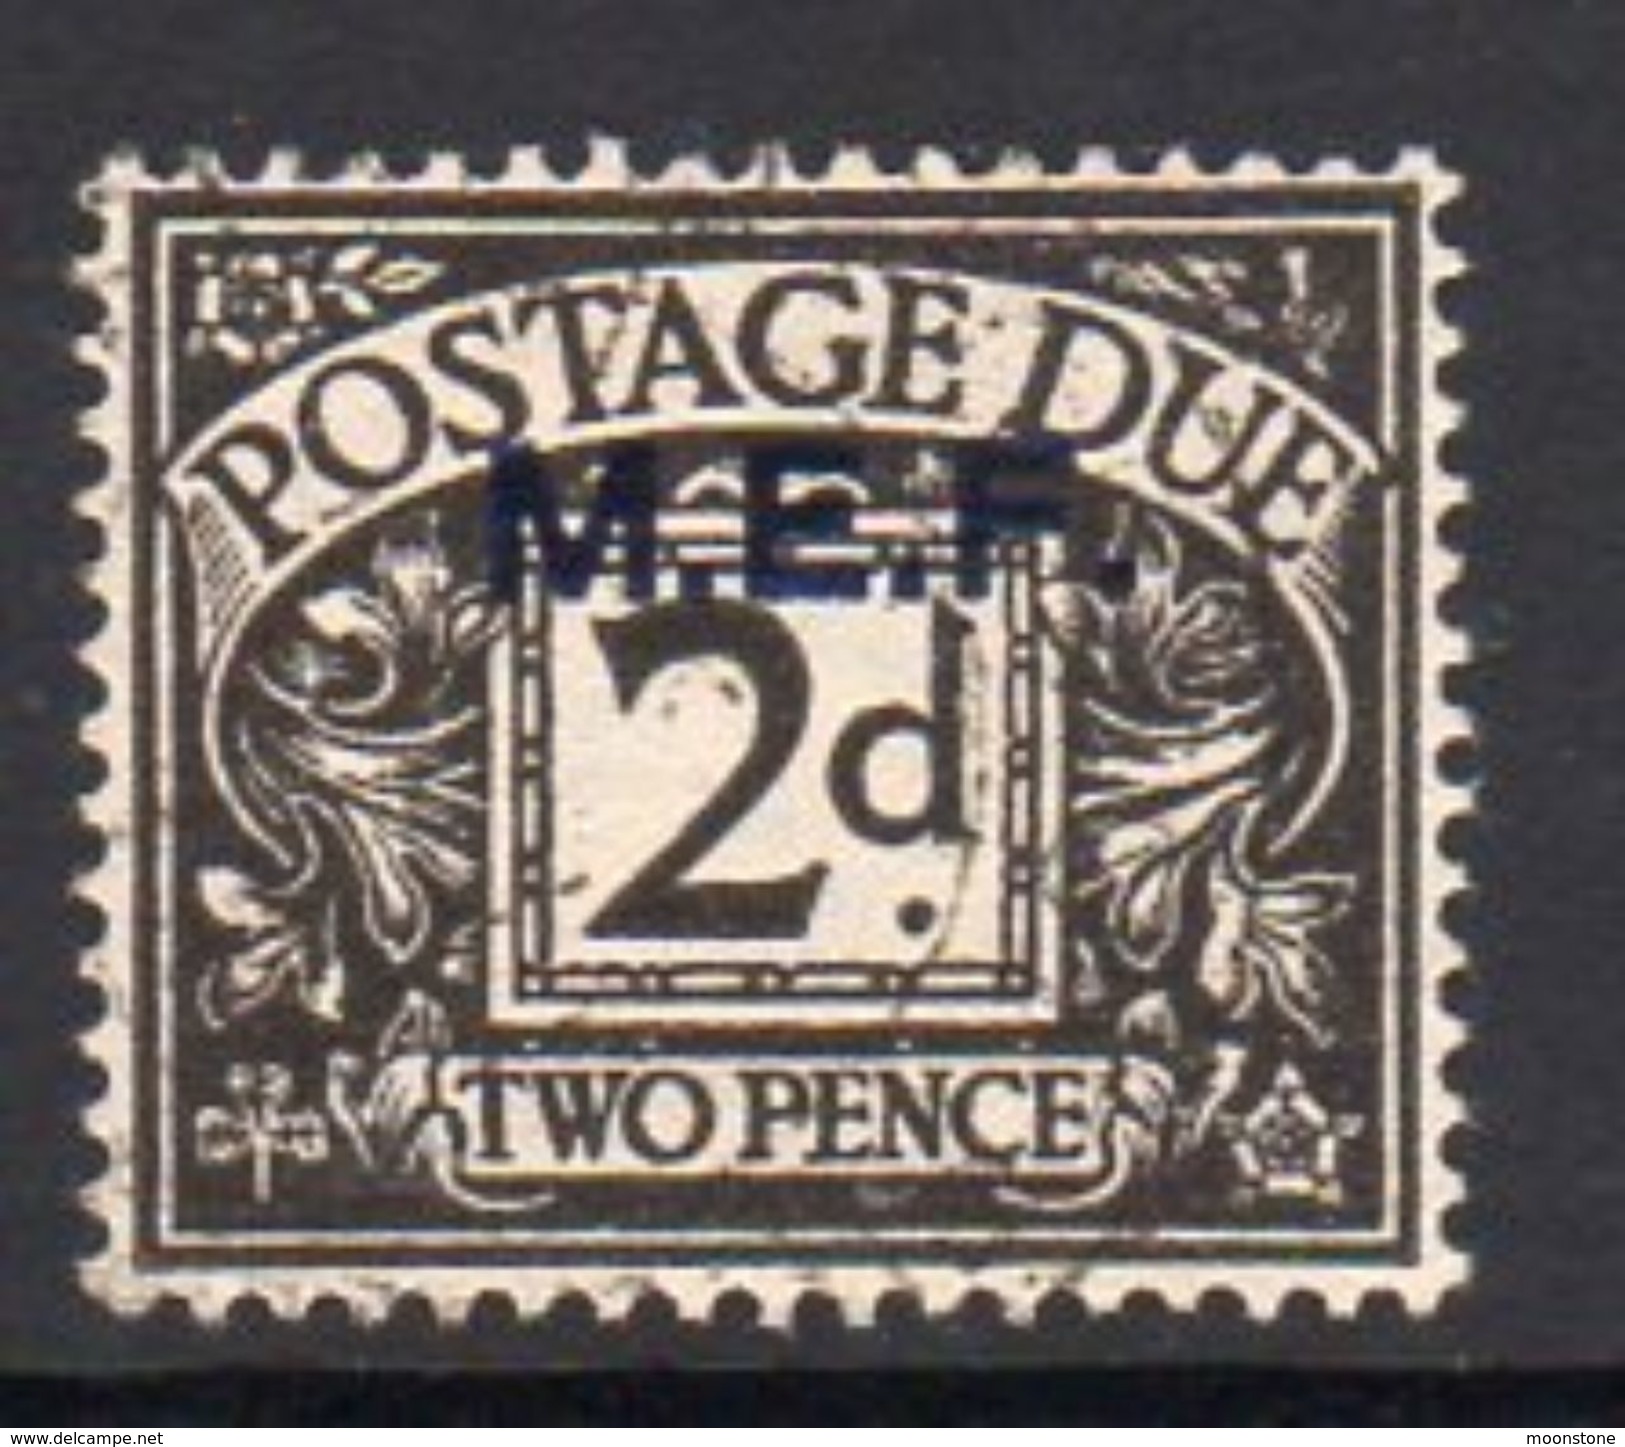 BOIC, Middle East Forces 1942 2d Postage Due Overprint On GB, Used, SG MD3 (A) - Britische Bes. MeF